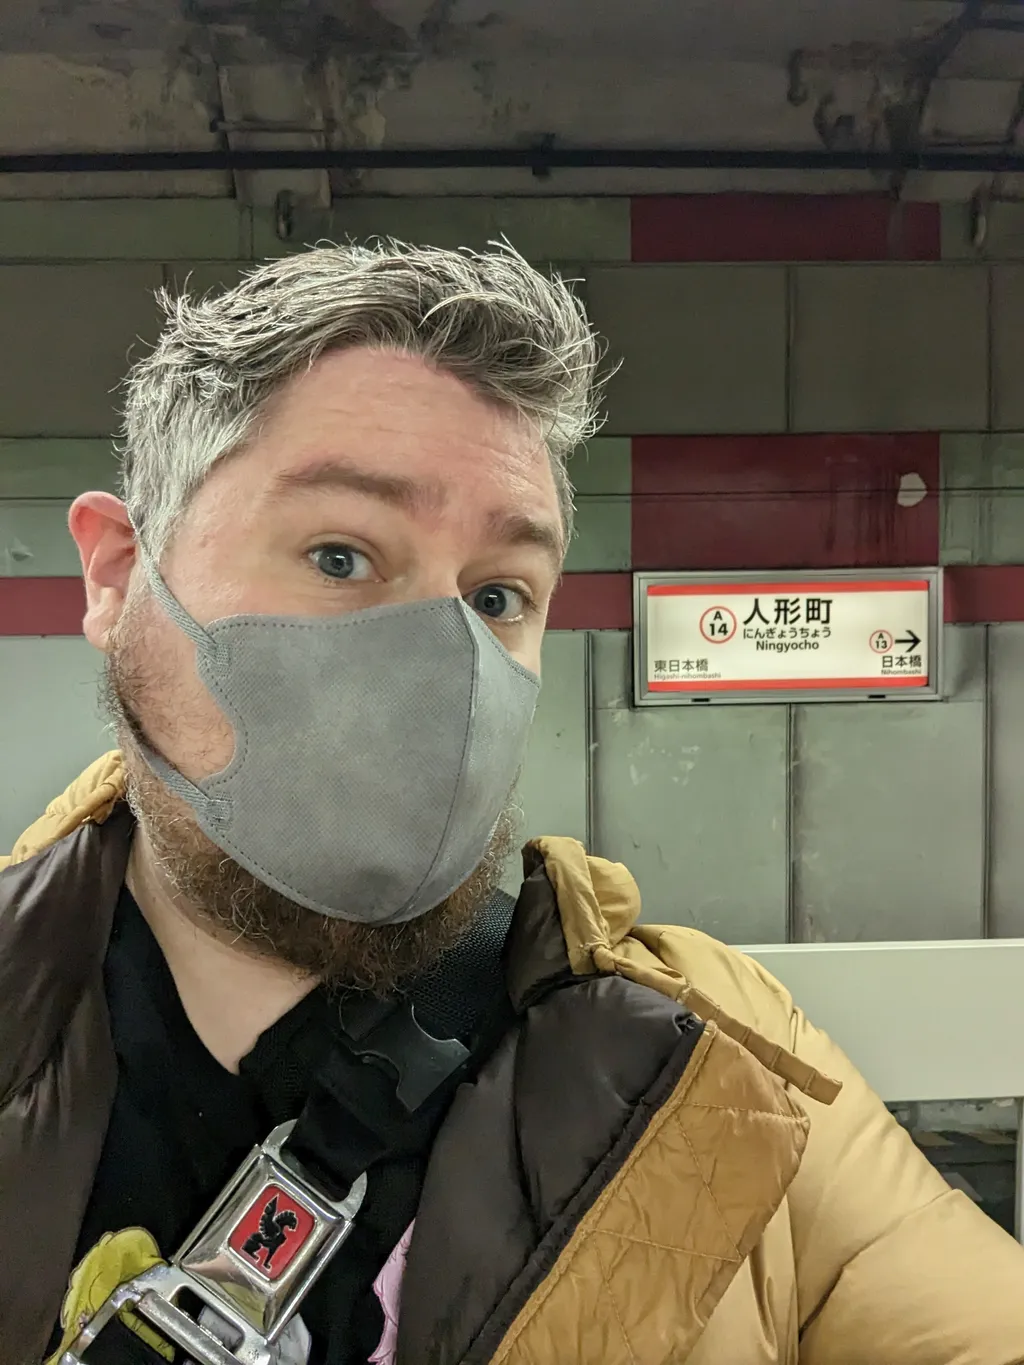 Dylan is wearing a mask and looking at the viewer. He is standing in front of a subway platform, with the 'Ningyocho' sign present in the background.